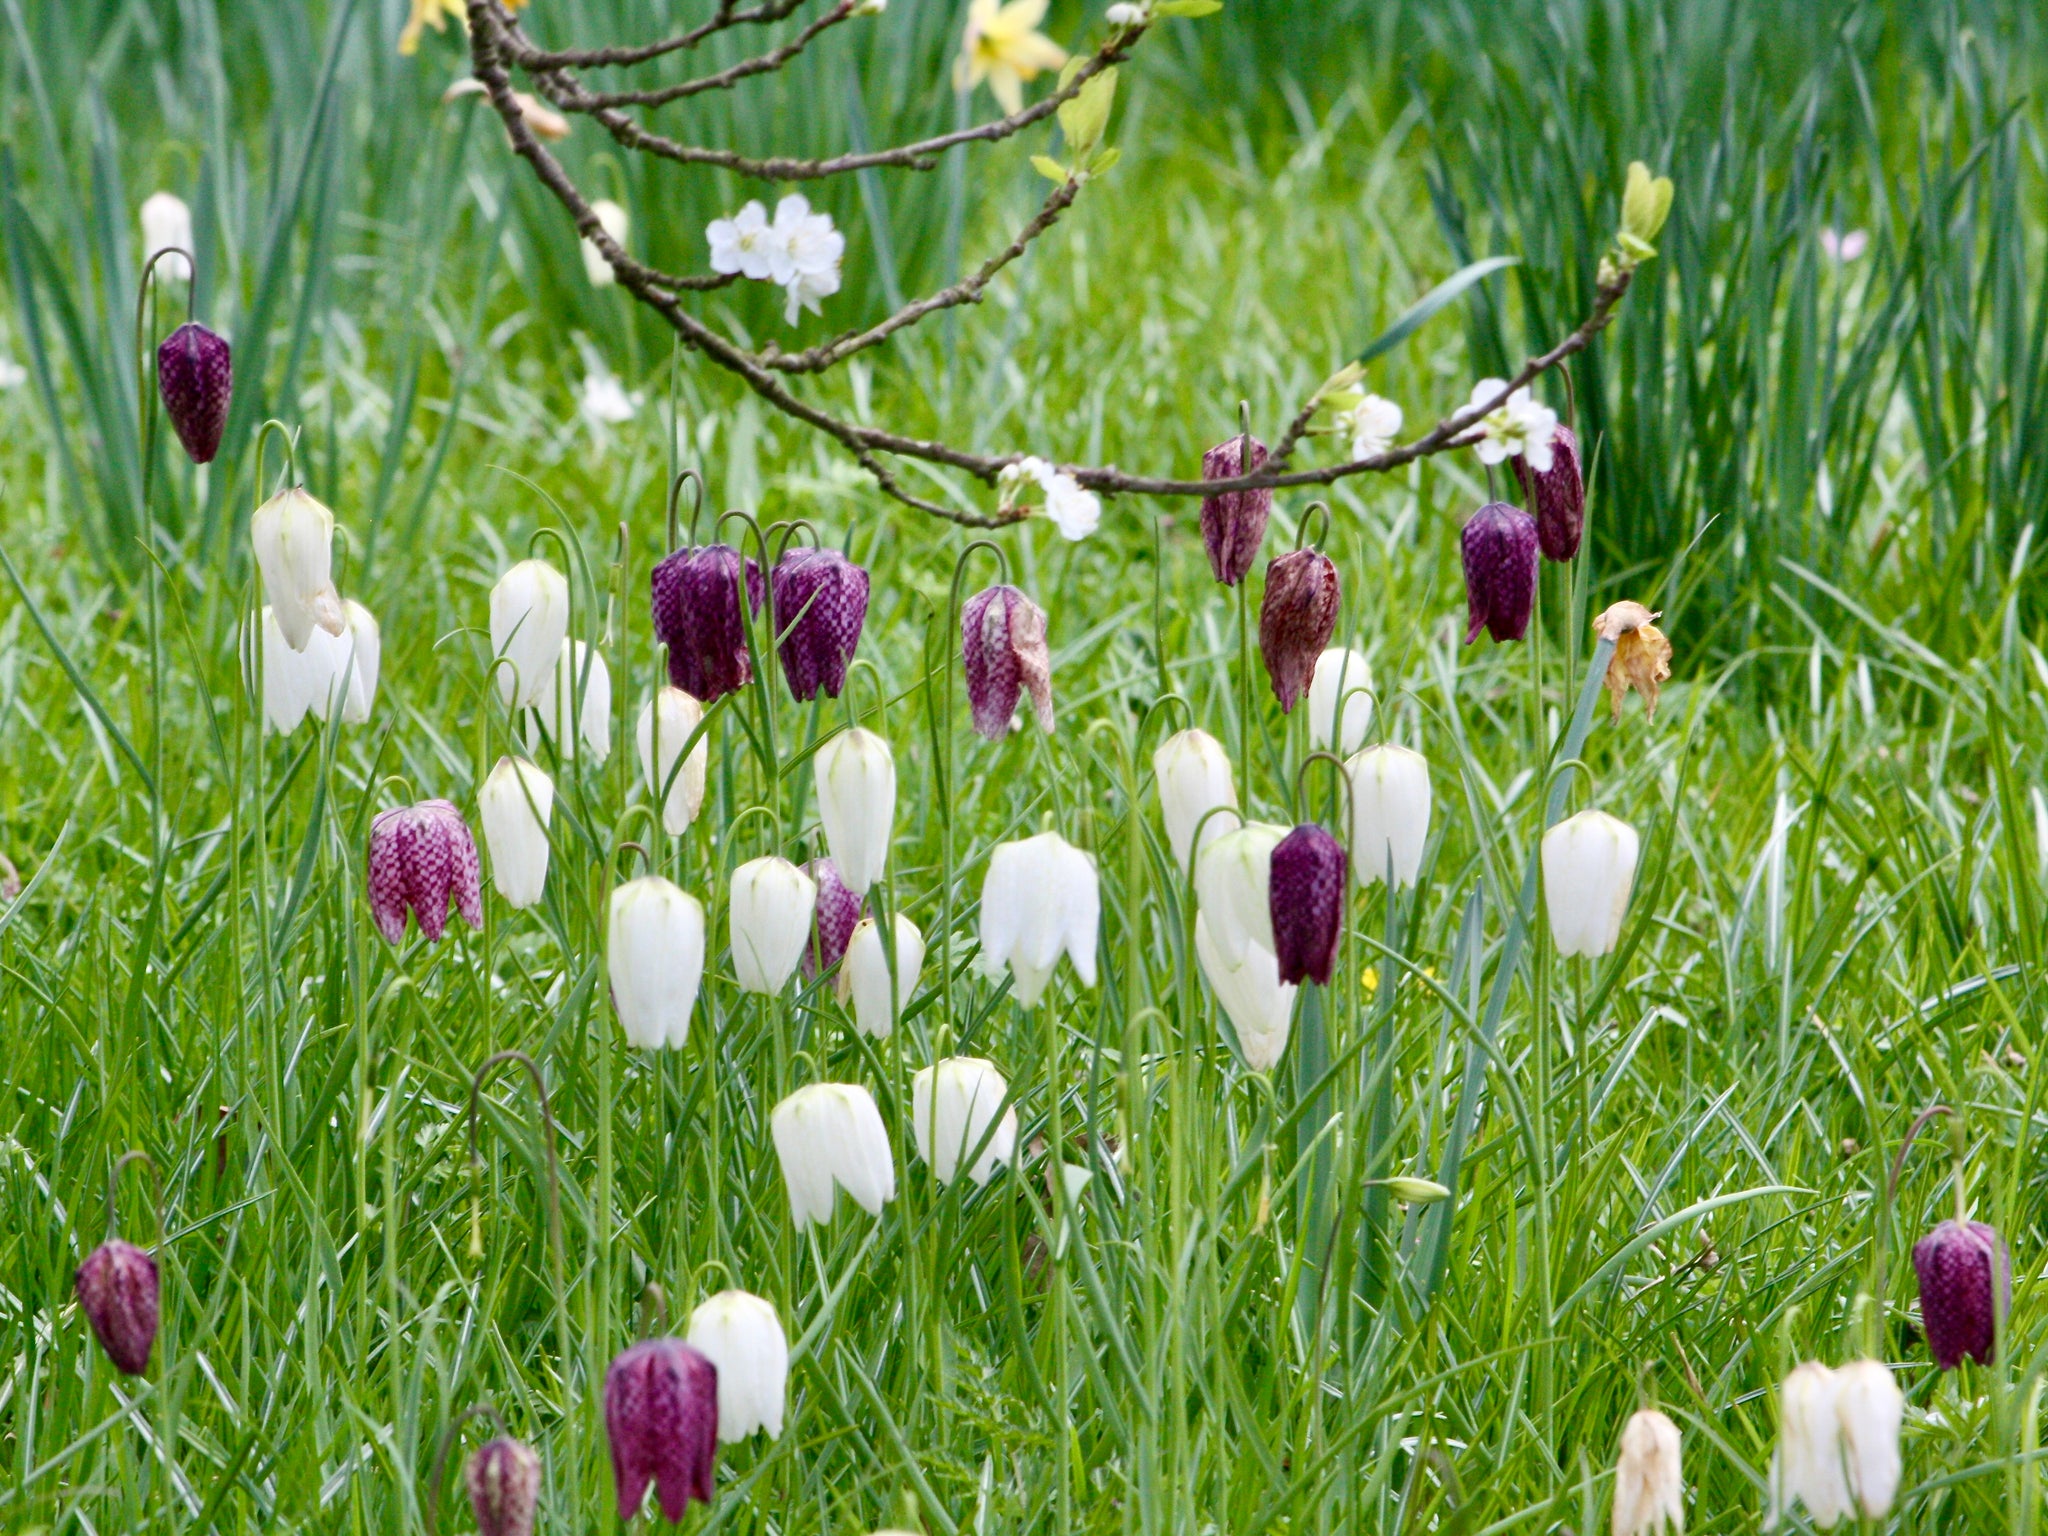 Snake's Head Fritillaries naturalised in grass